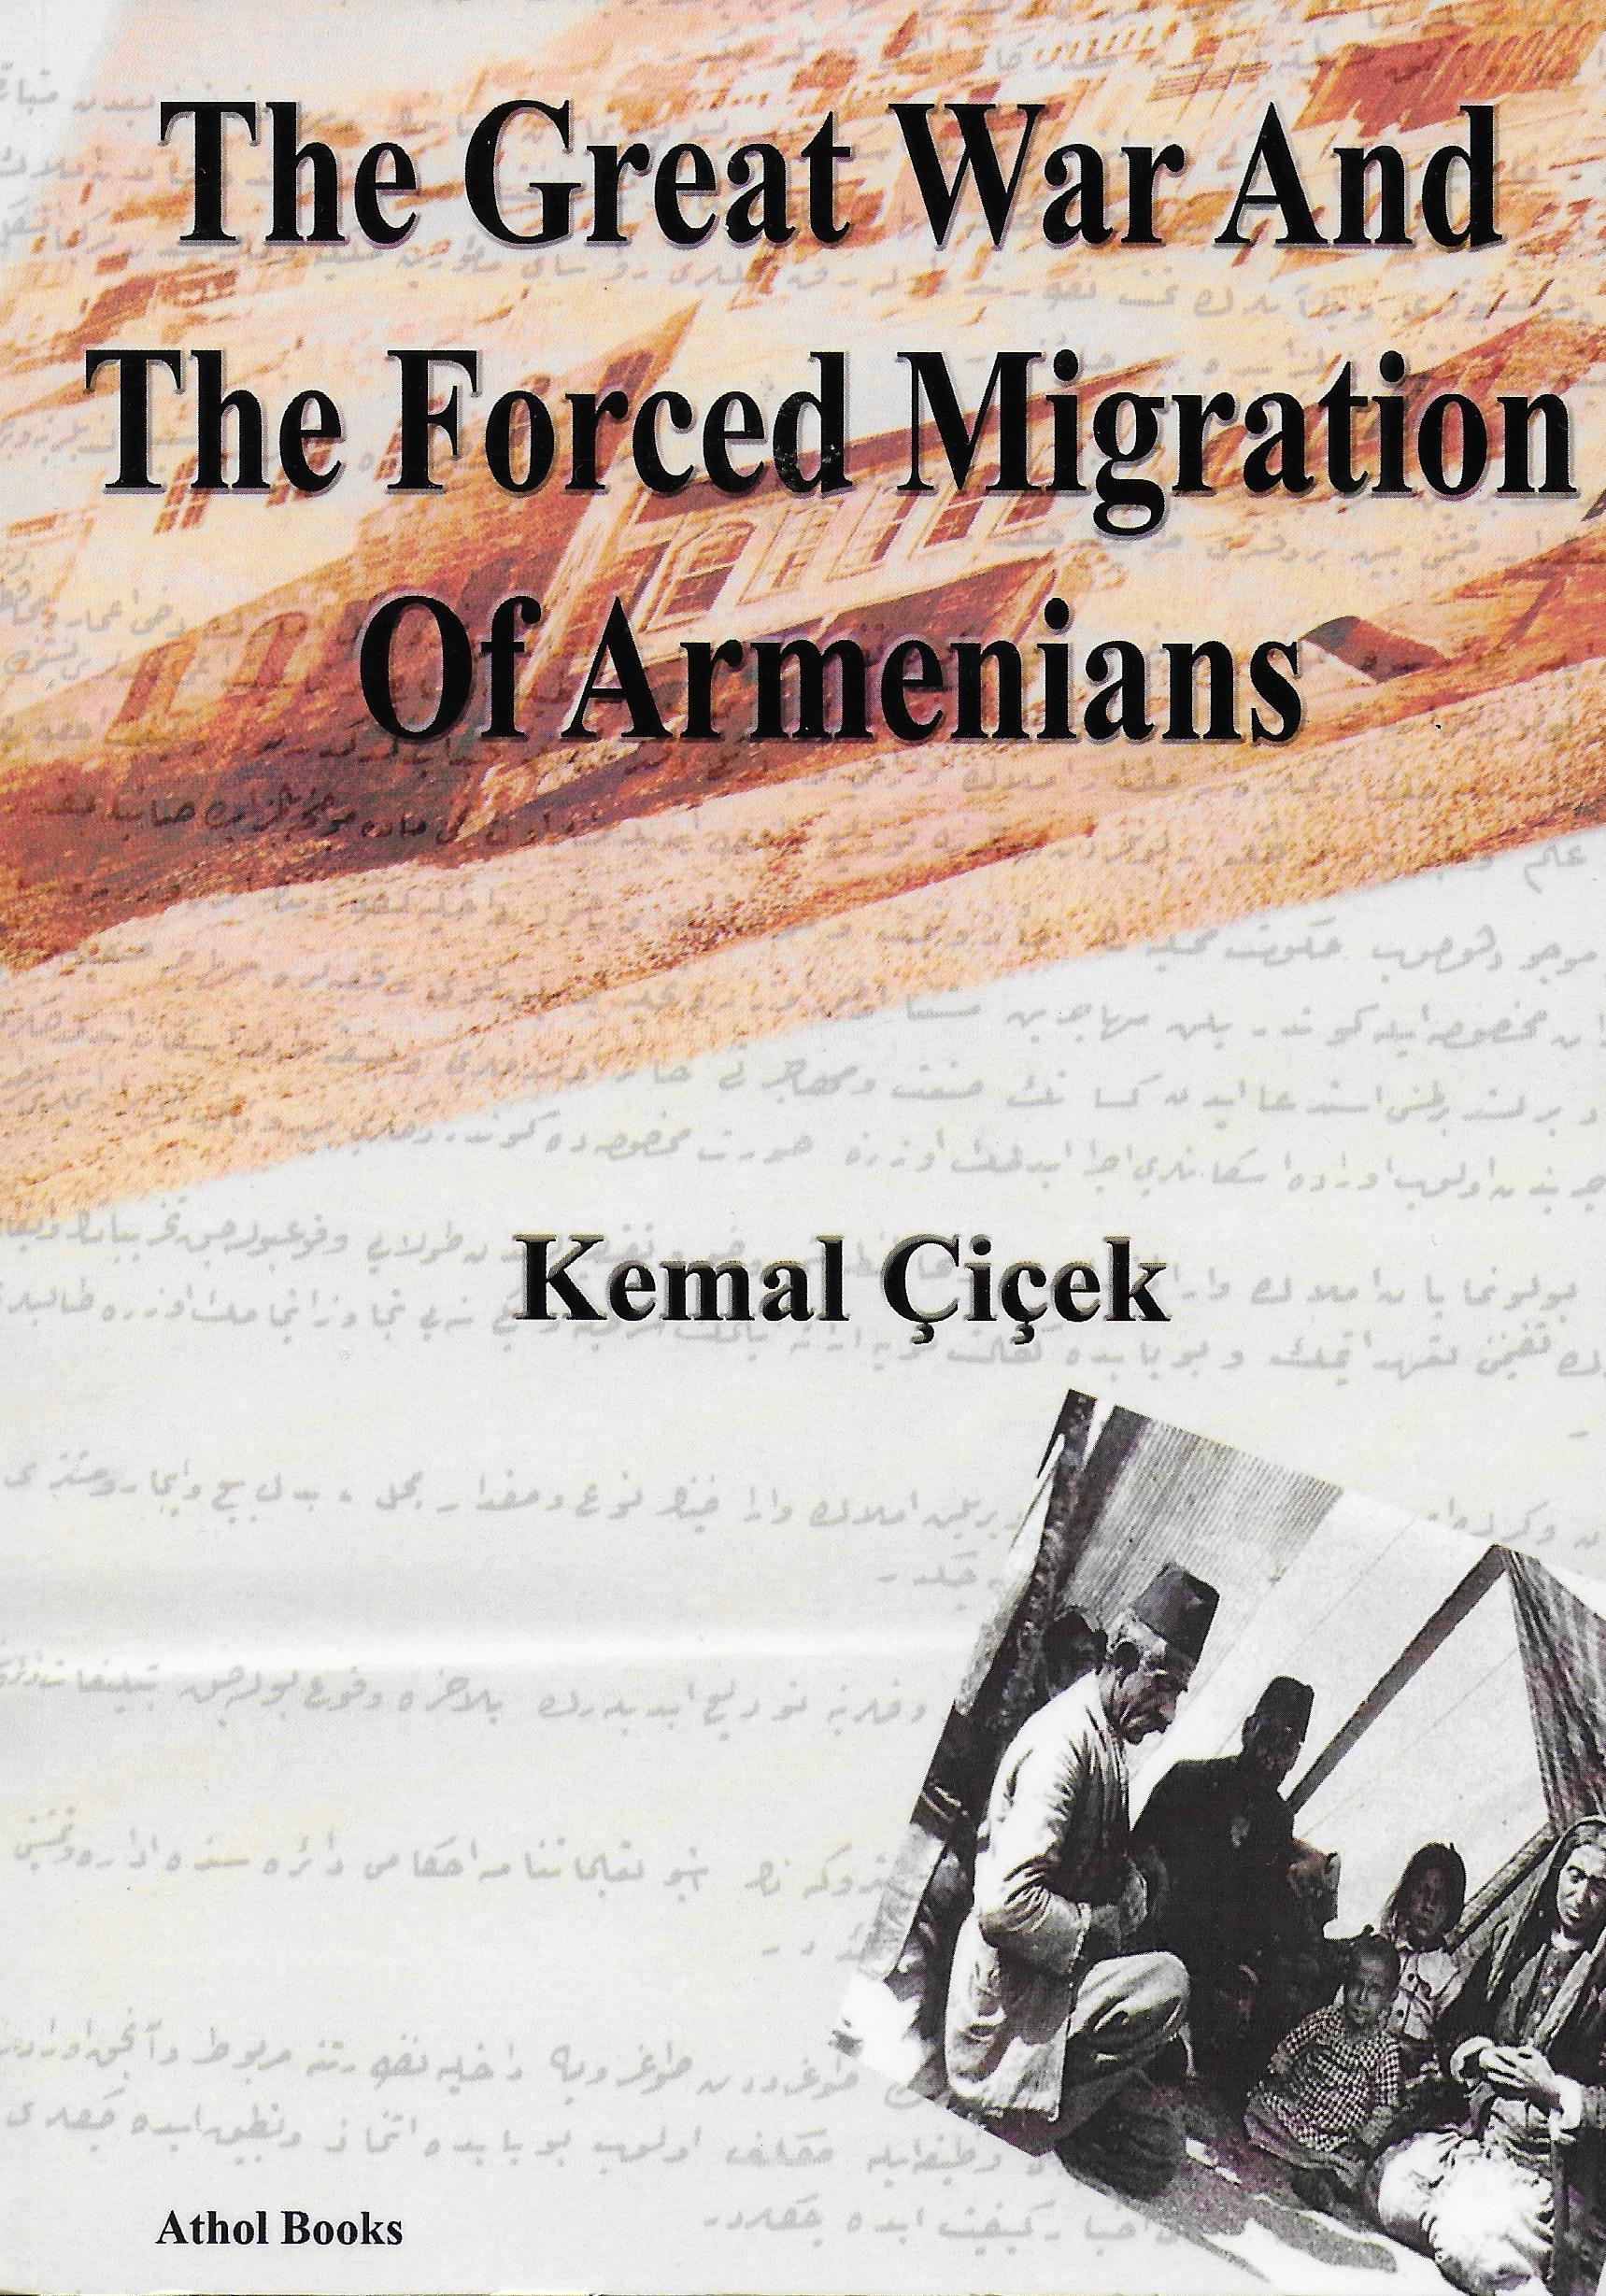 The Great War And The Forced Migration Of Armenians